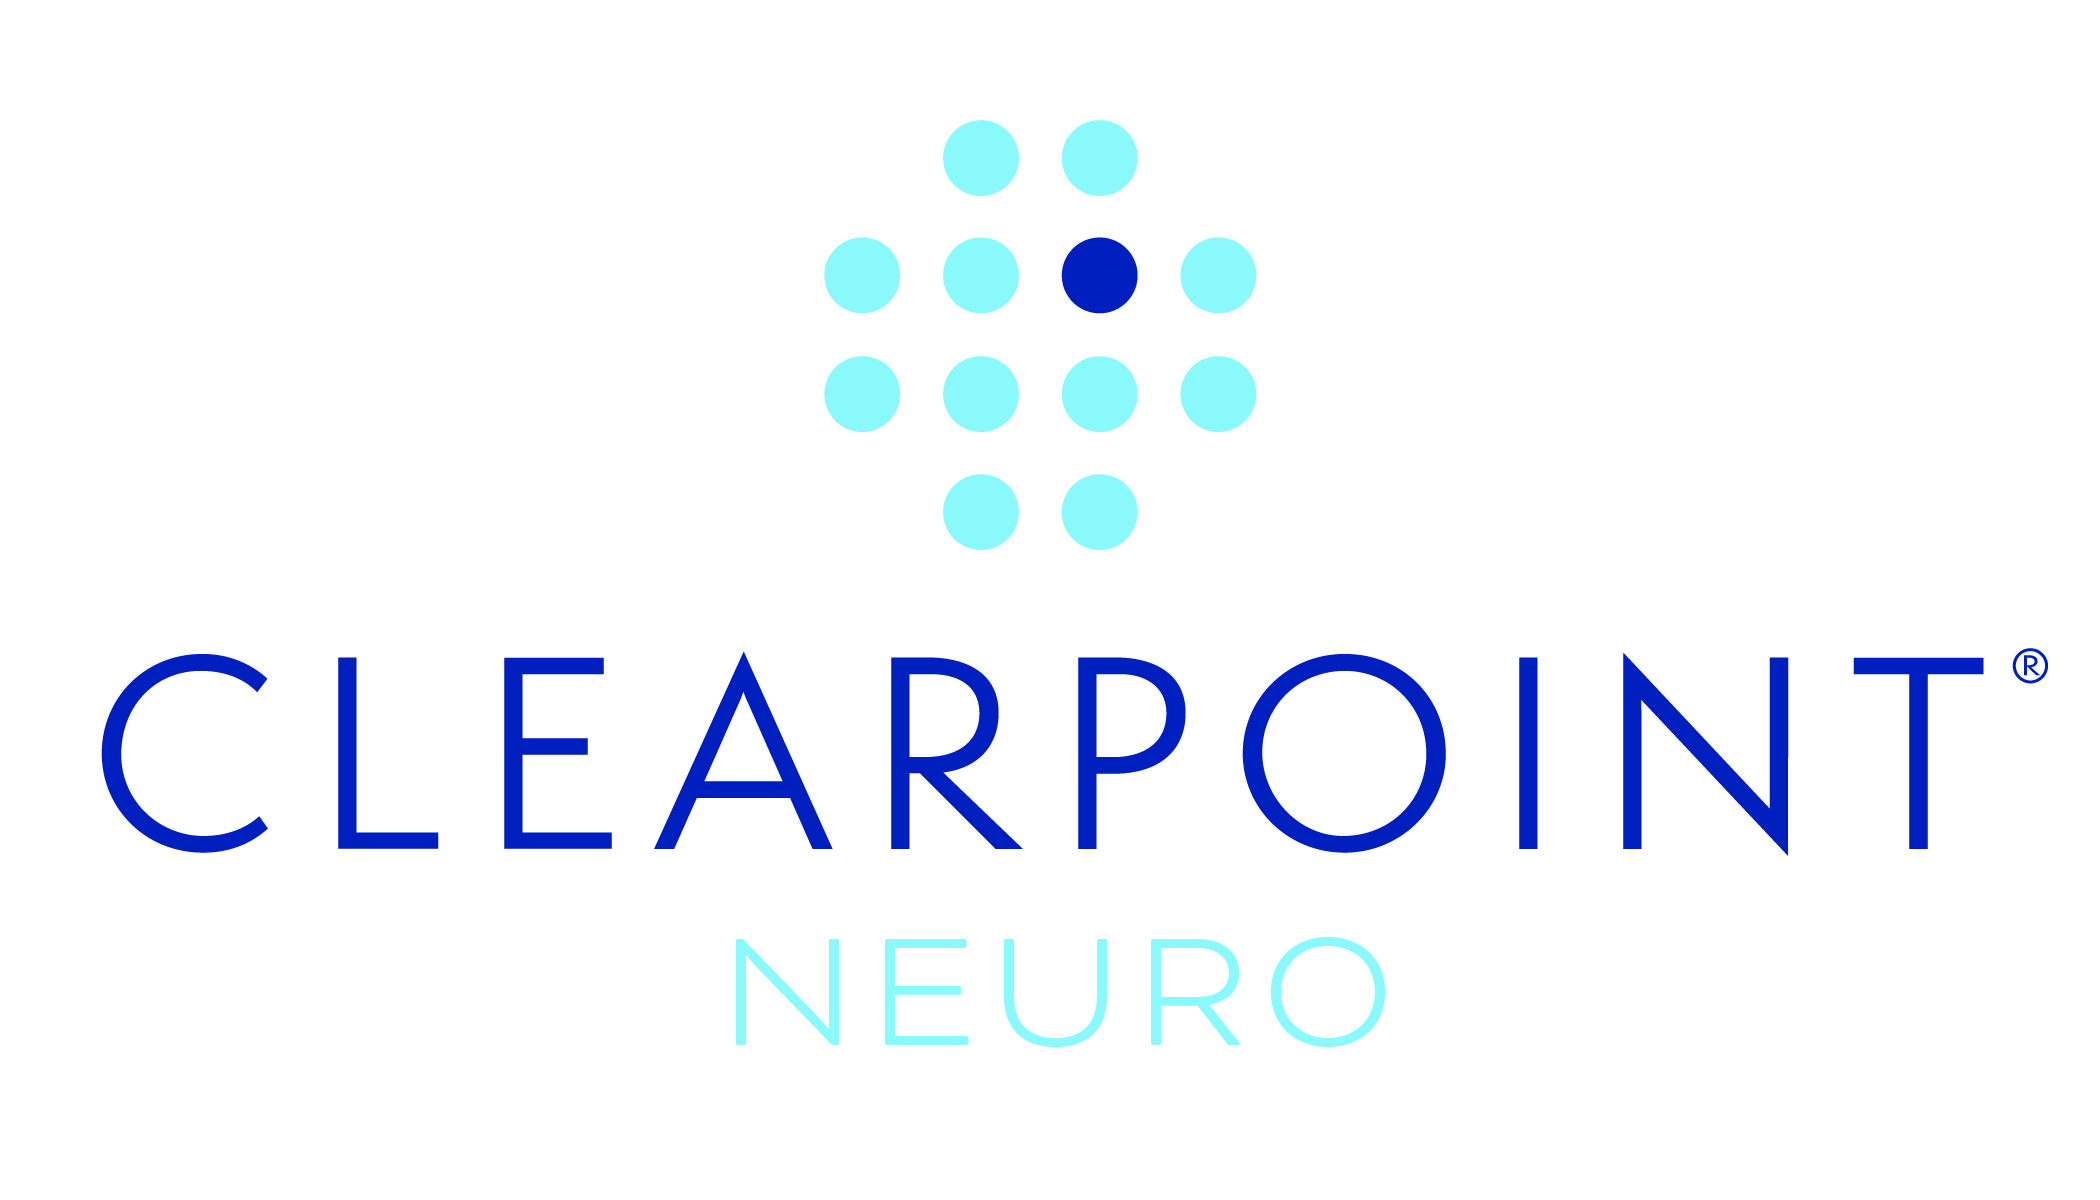 ClearPoint Neuro Announces FDA Clearance for ClearPoint Maestro™ Brain Model